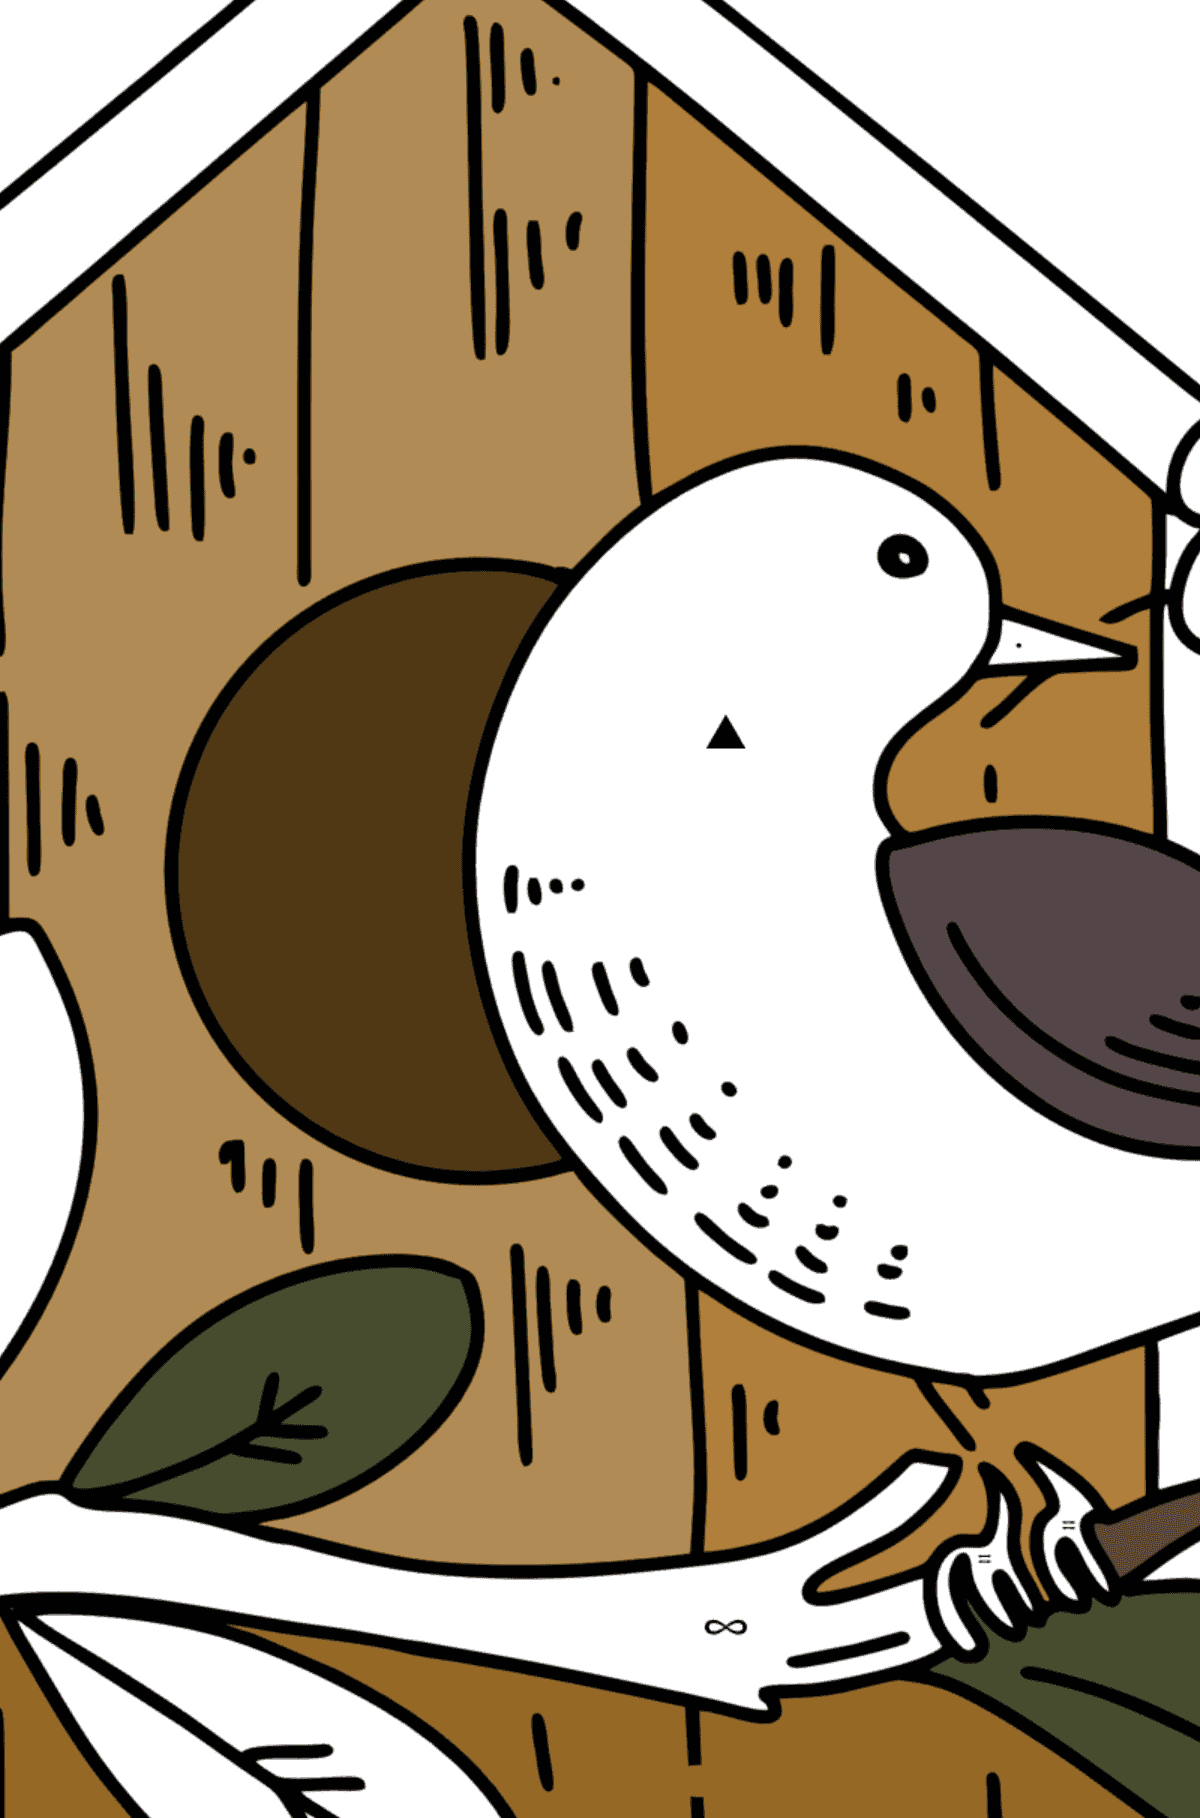 Starling at the Birdhouse coloring page - Coloring by Symbols for Kids